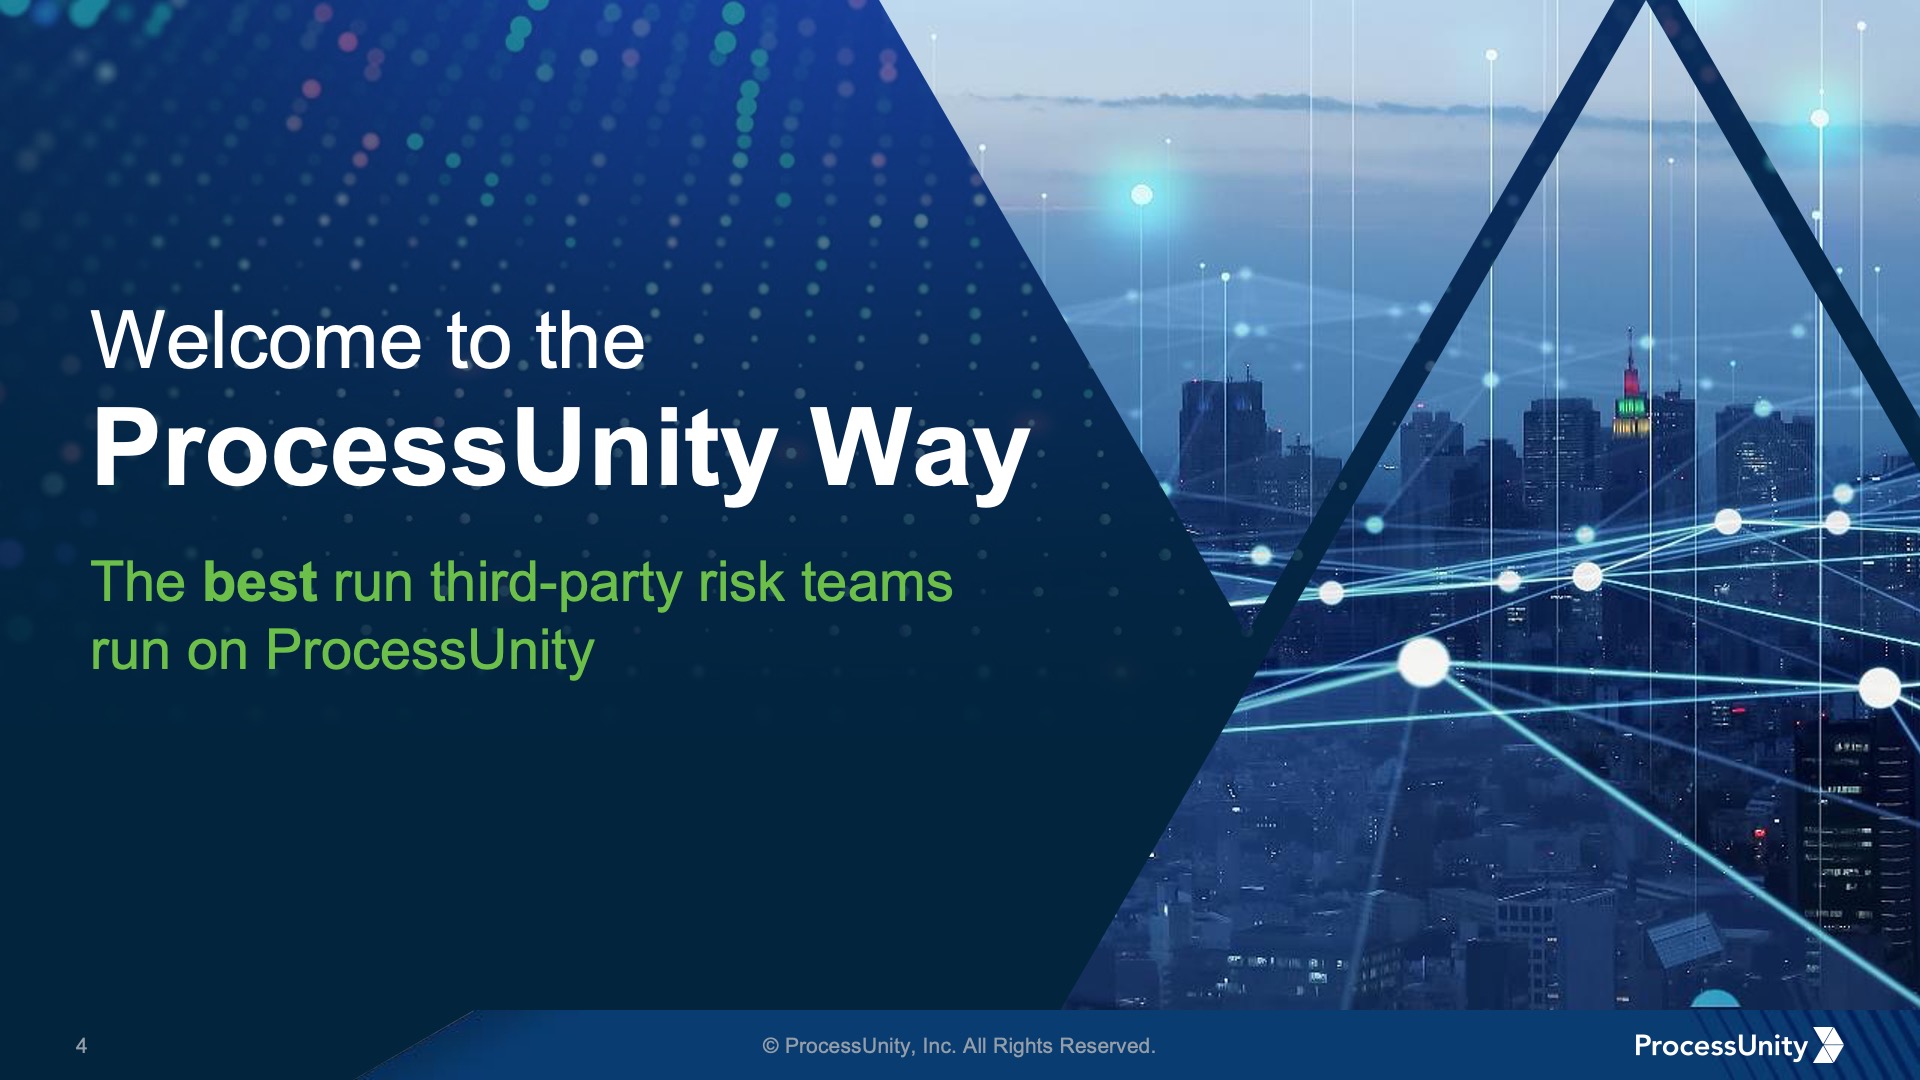 A slide design from the Process Unity presentation with a city image inside triangles.